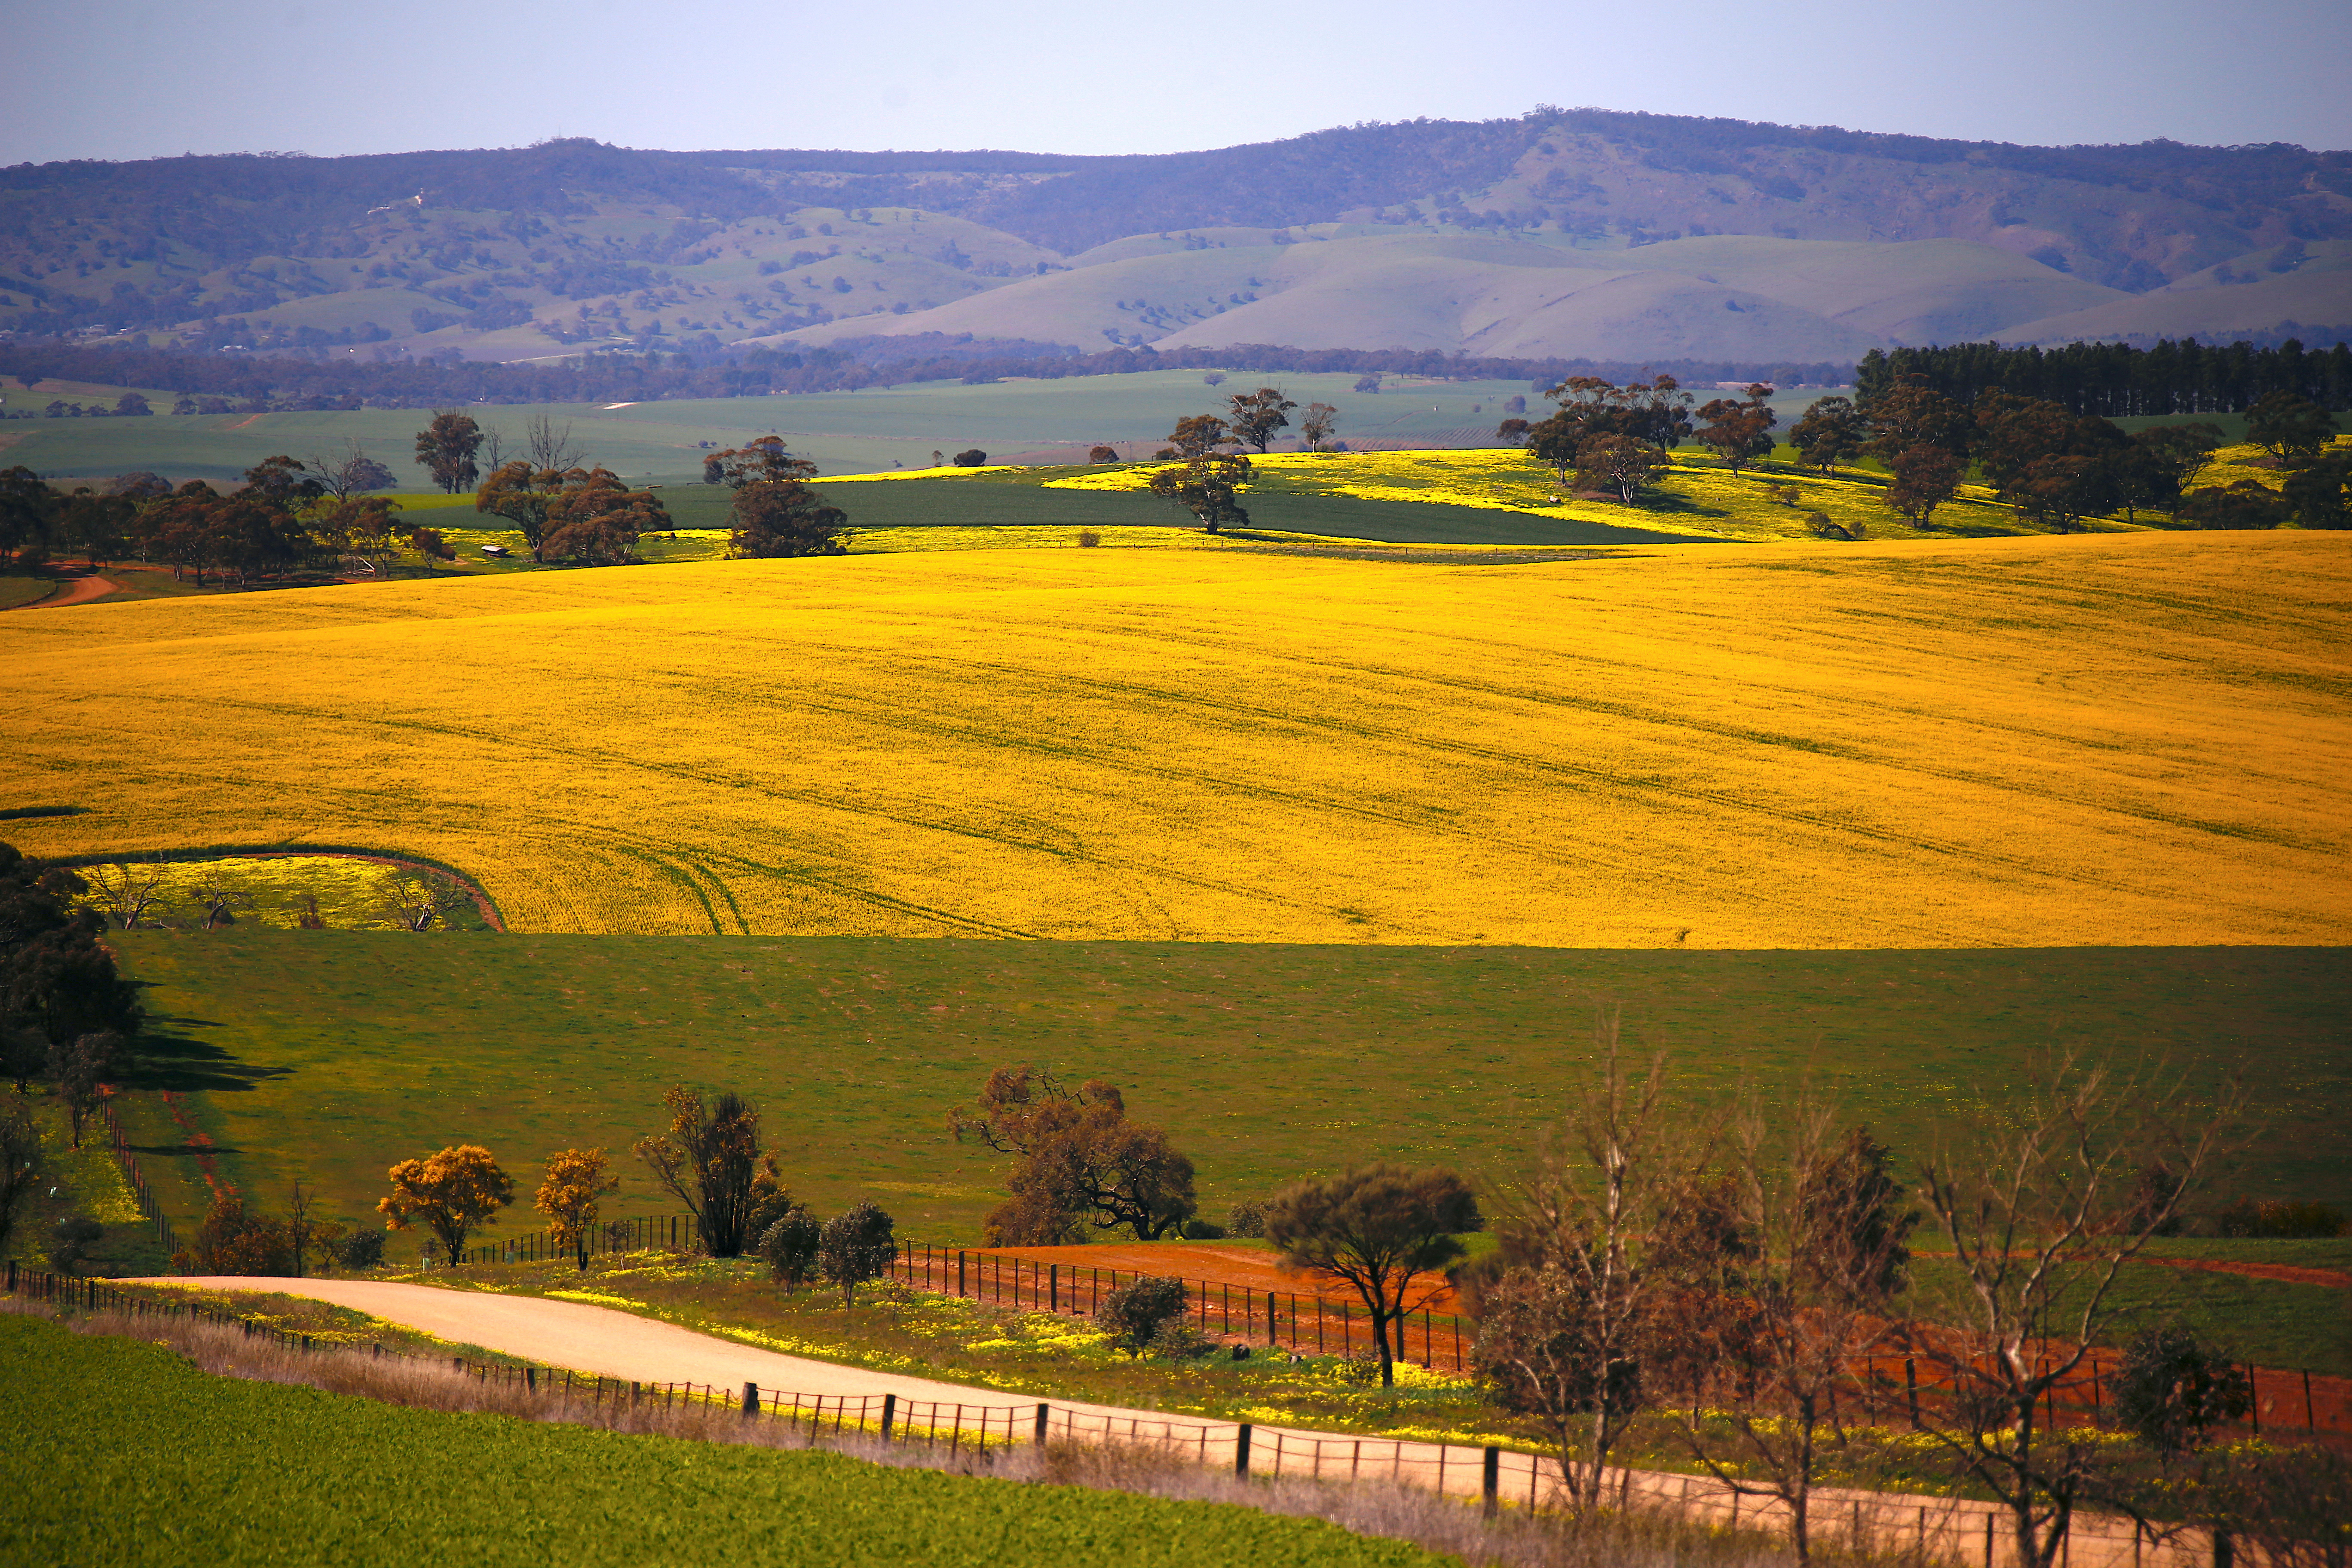 A paddock containing a crop of canola can be seen near a road located on the outskirts of the town of Mallala, north of Adelaide